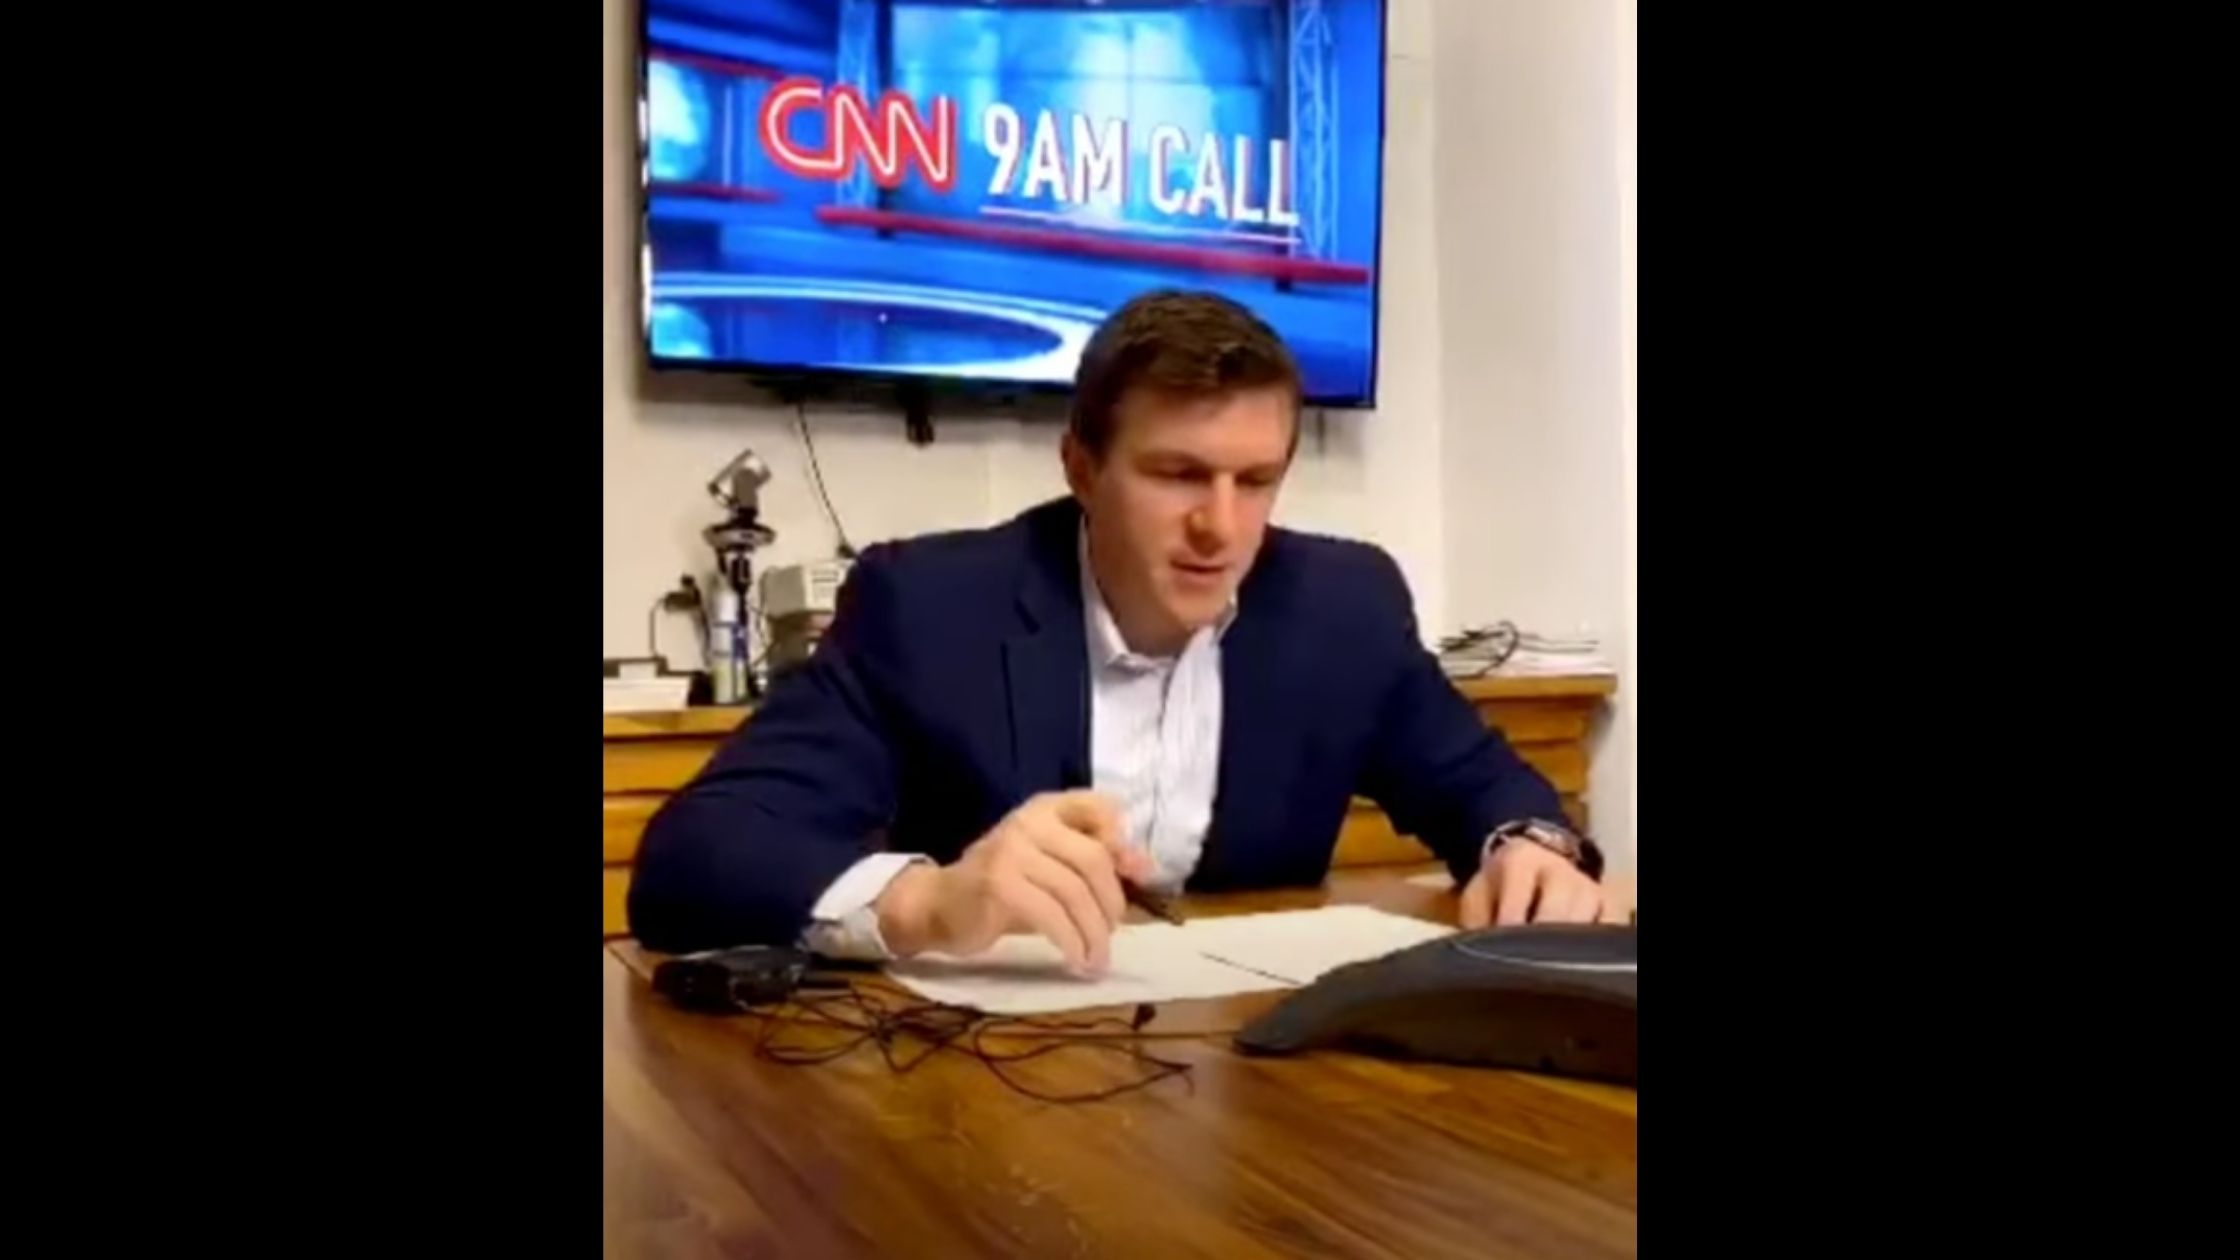 Conservative investigative journalist Jame O’Keefe confronted CNN president Jeff Zucker on a network editorial meeting conference call which he live-streamed on social media.